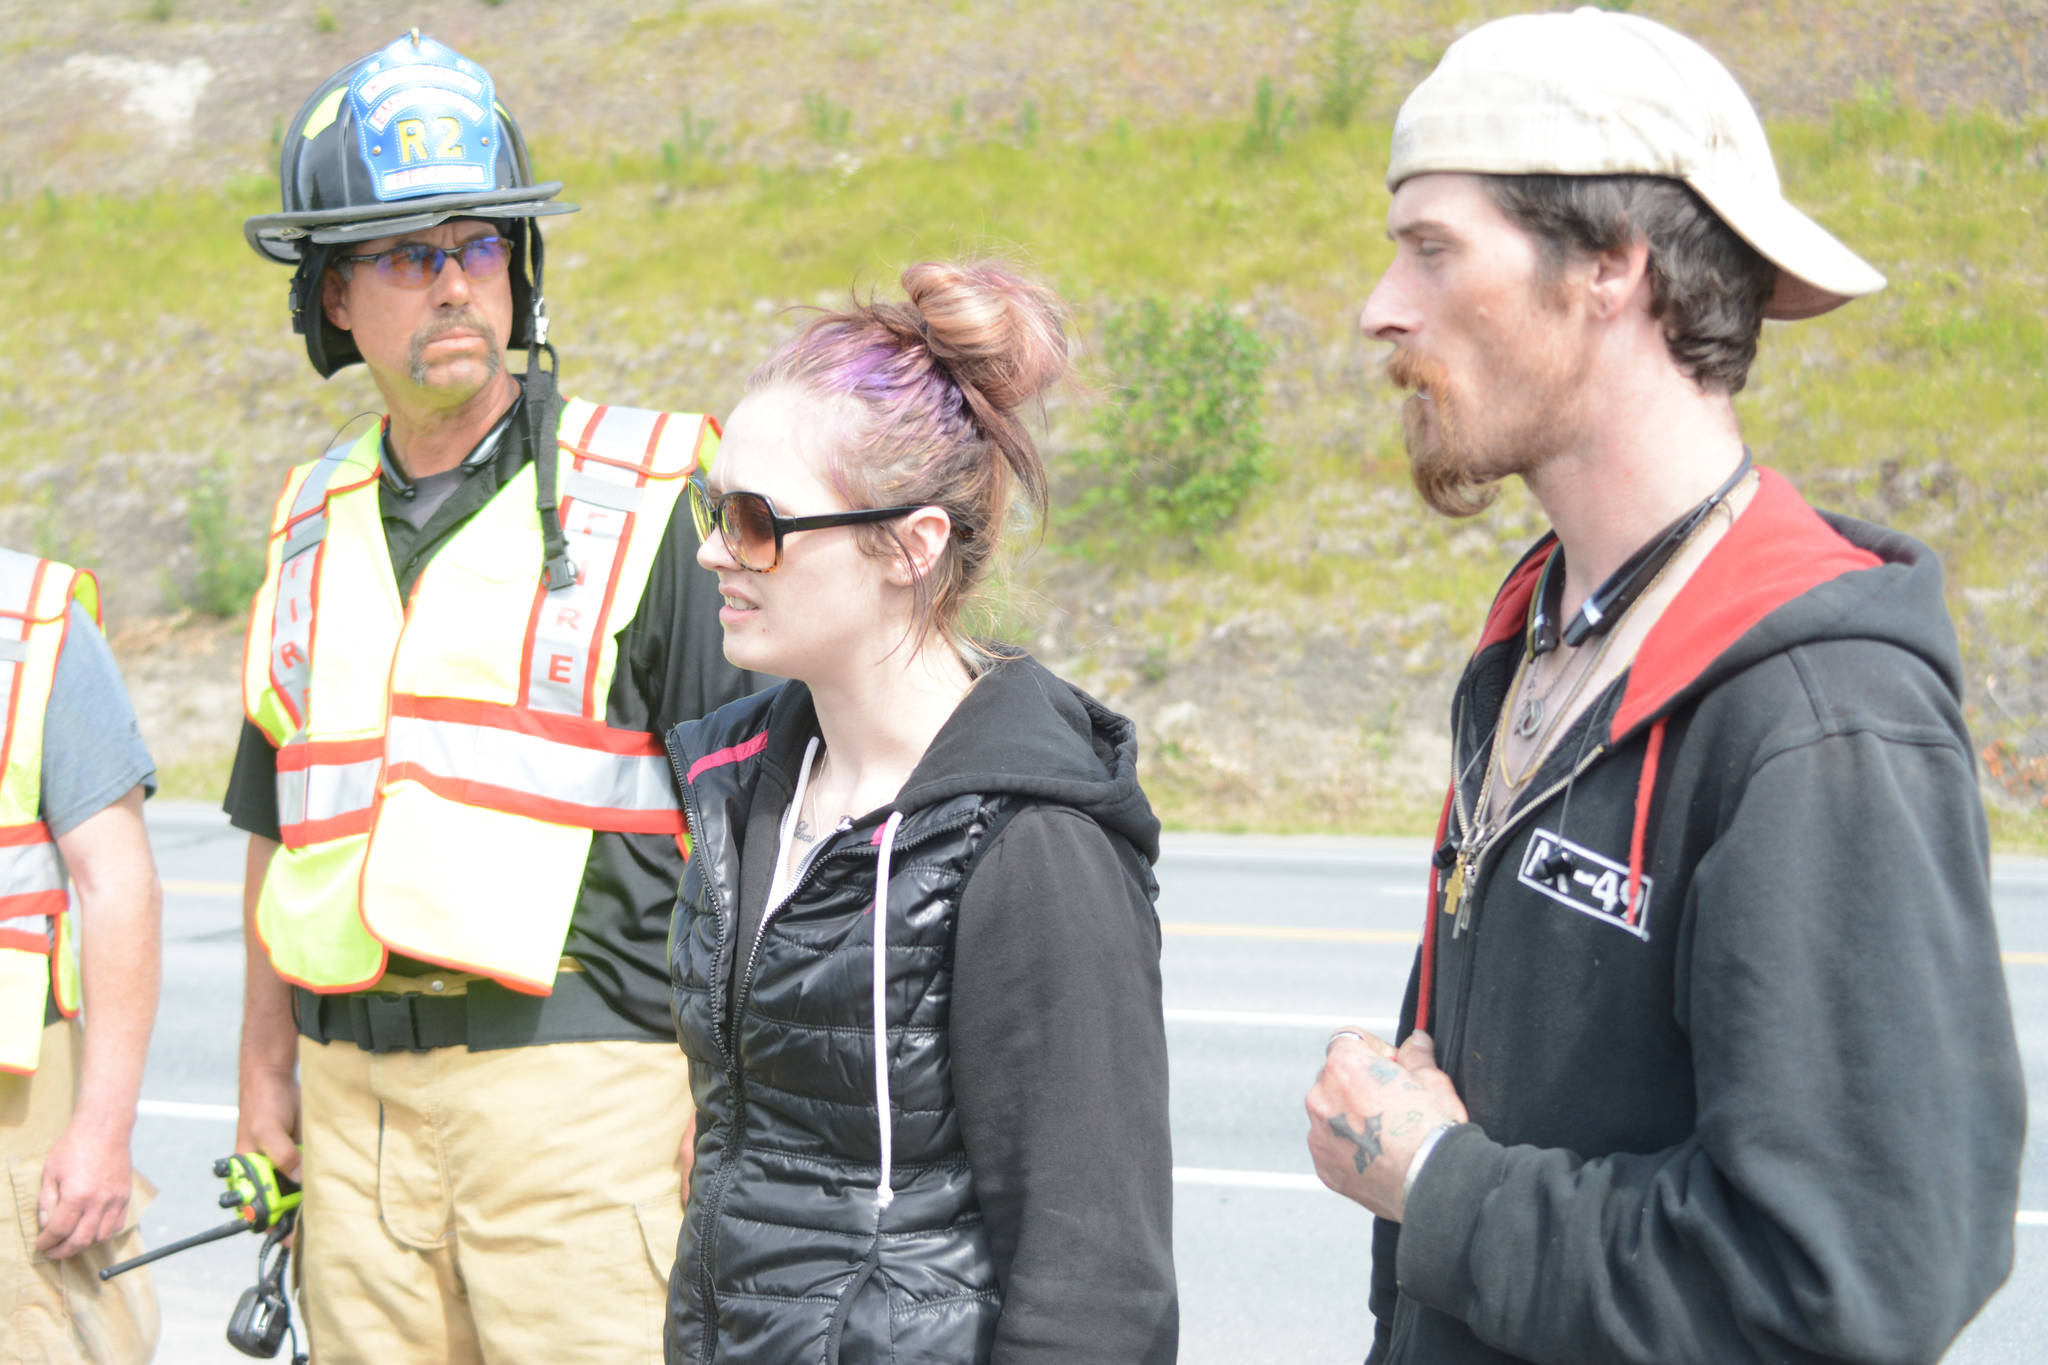 Tiffany Couch, center, tells responders that her friend, Thayr Watson, had crashed his truck into a ravine at the Baycrest Hill turnout in Homer, Alaska sometime over the weekend and climbed out on his own. Rescuers earlier on Monday, July 24, 2017 had found a truck that had plunged over the edge, but did not find any victims. They had searched about three hours on Monday before learning that Watson had walked away from the scene. Police later contacted Watson and found he was OK. Kachemak Emergency Services firefighter Greg Collins, left, watches. At right is Watson’s friend, Tim Taylor. Photo by Michael Armstrong/Homer News